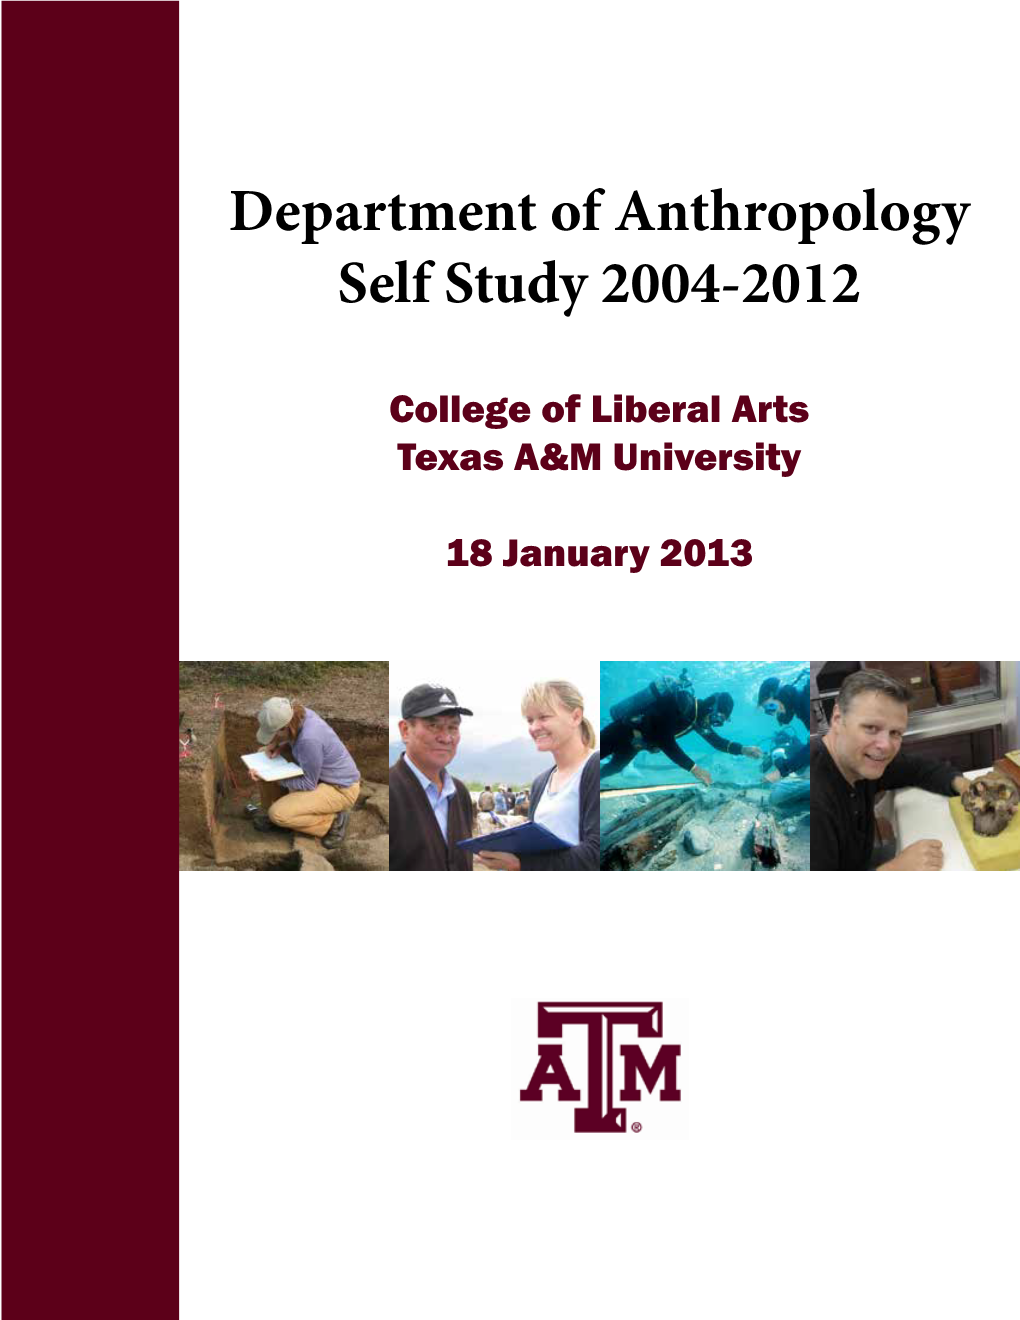 Department of Anthropology Self Study 2004-2012